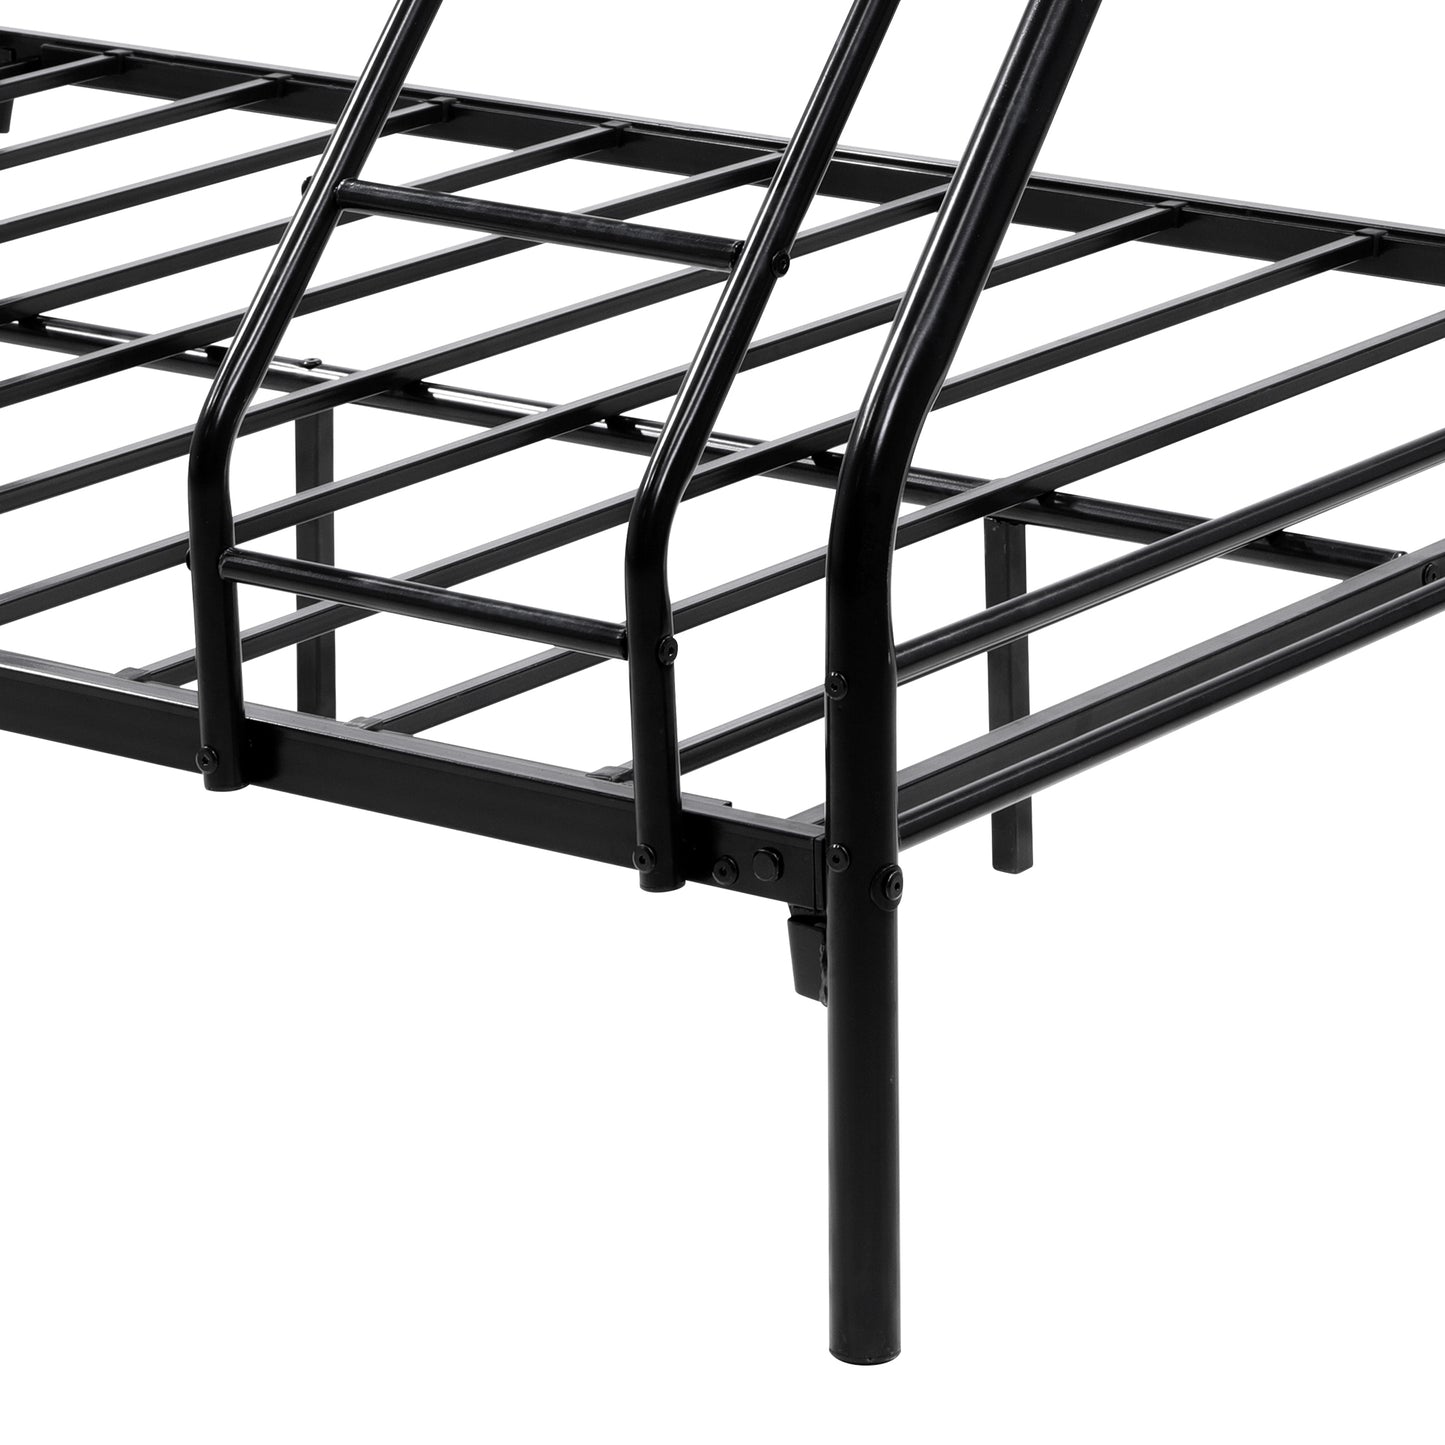 Heavy Duty Twin-Over-Full Metal Bunk Bed( Easy Assembly)